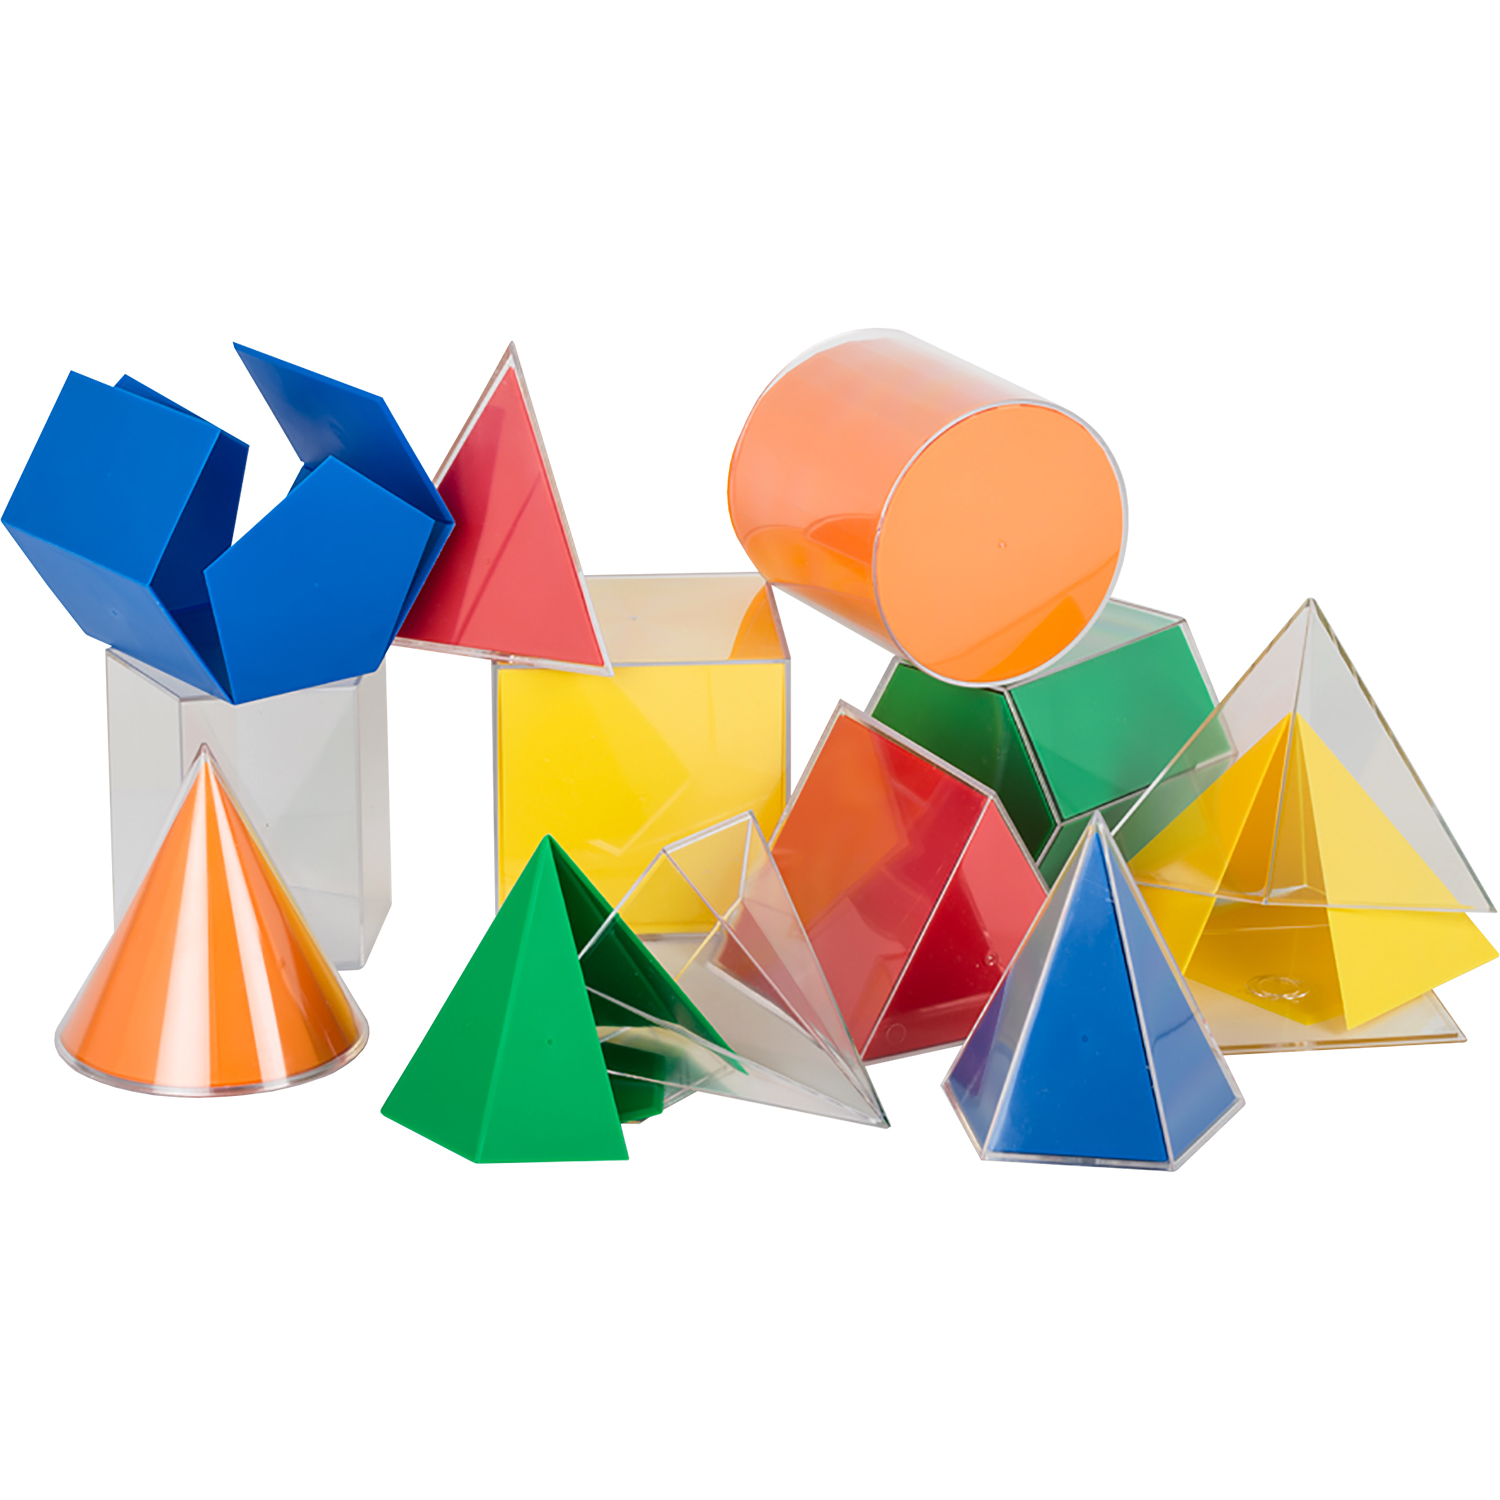 Geometric Solids With Folding Nets